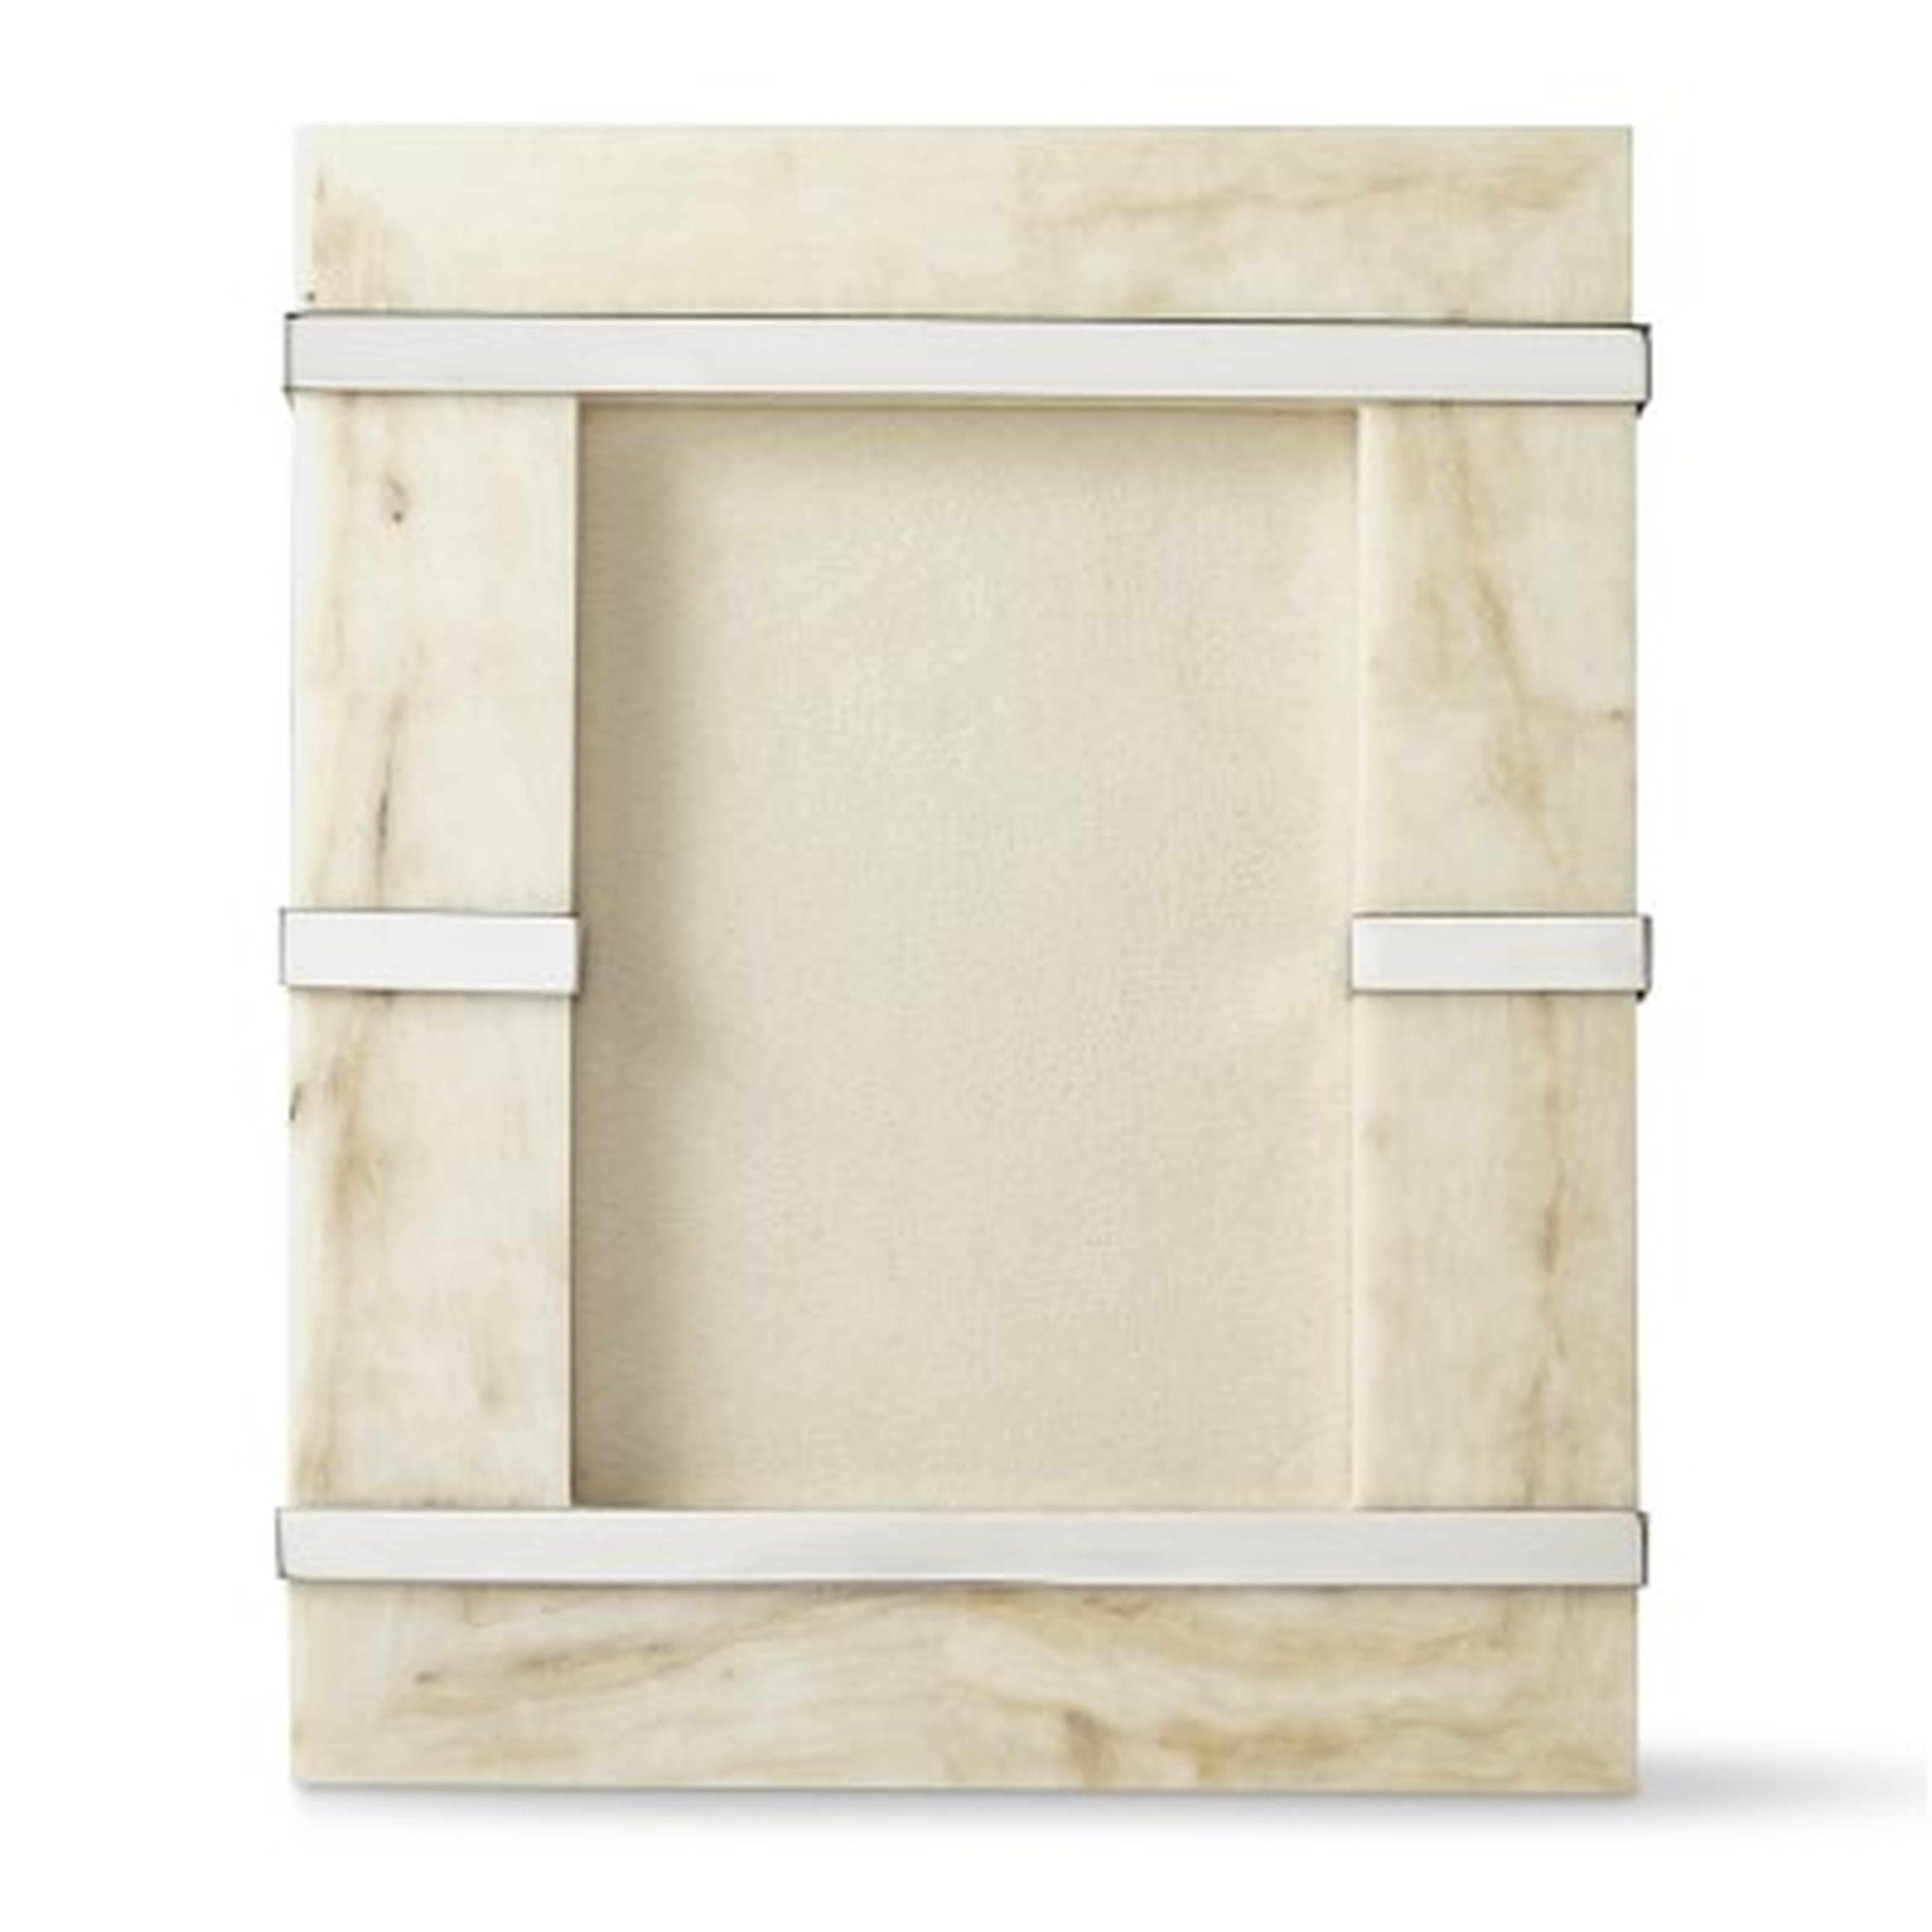 Stone and Polished Nickel Frame, 5" X 7" - Williams Sonoma